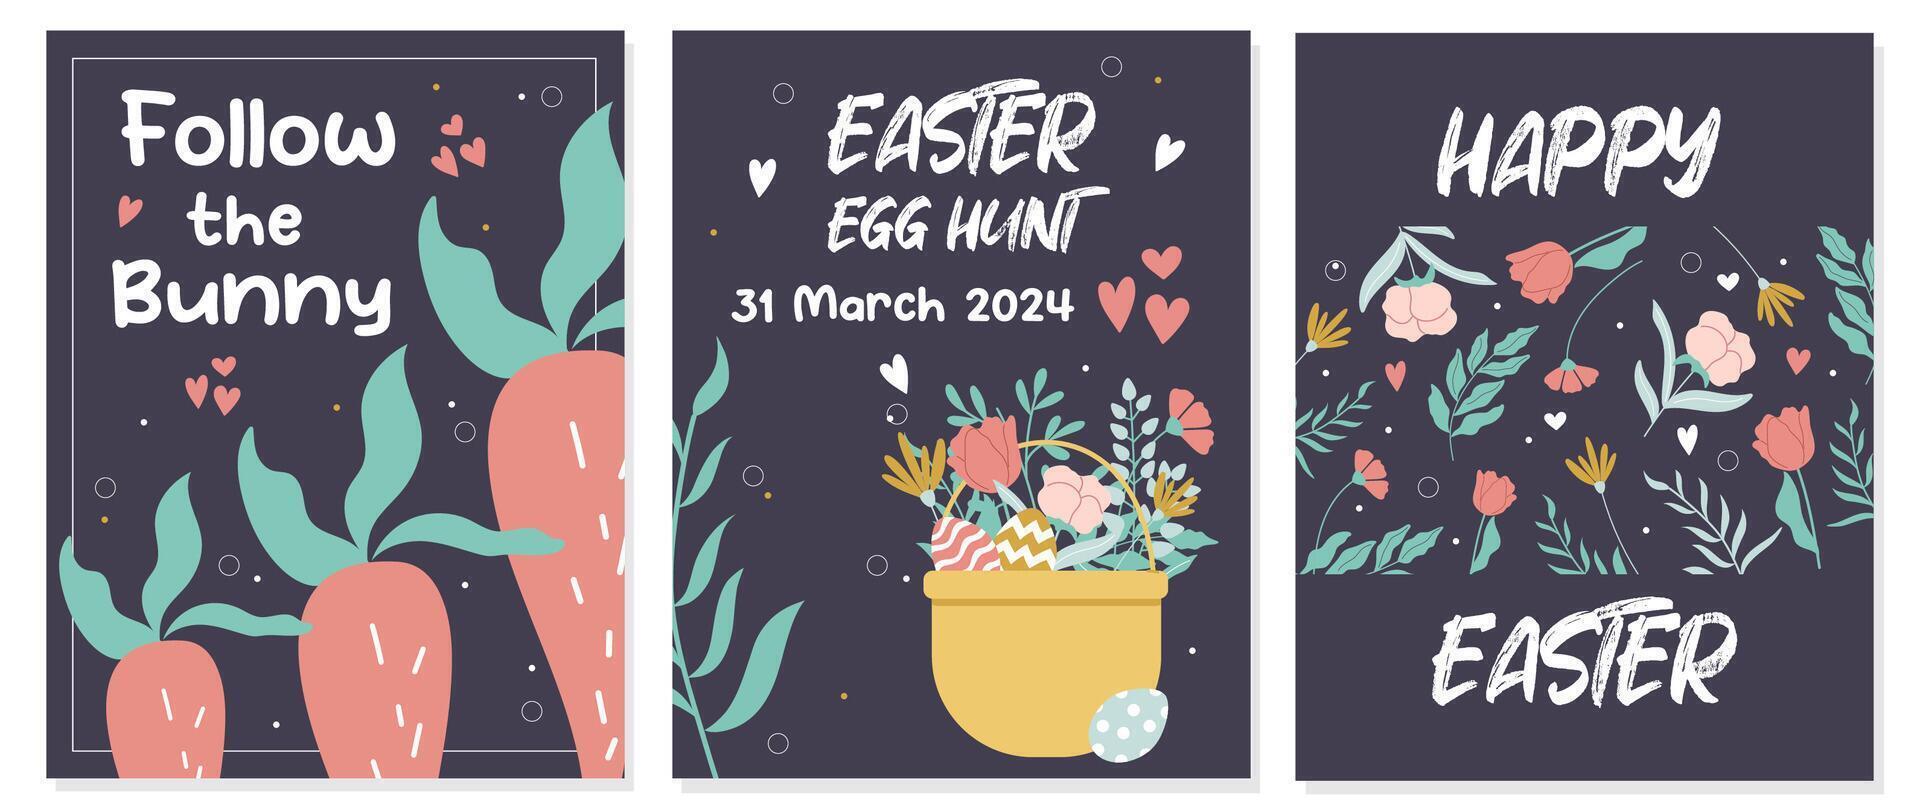 Posters or templates for Easter egg hunt. Colourful handdrawn vector design on dark background.